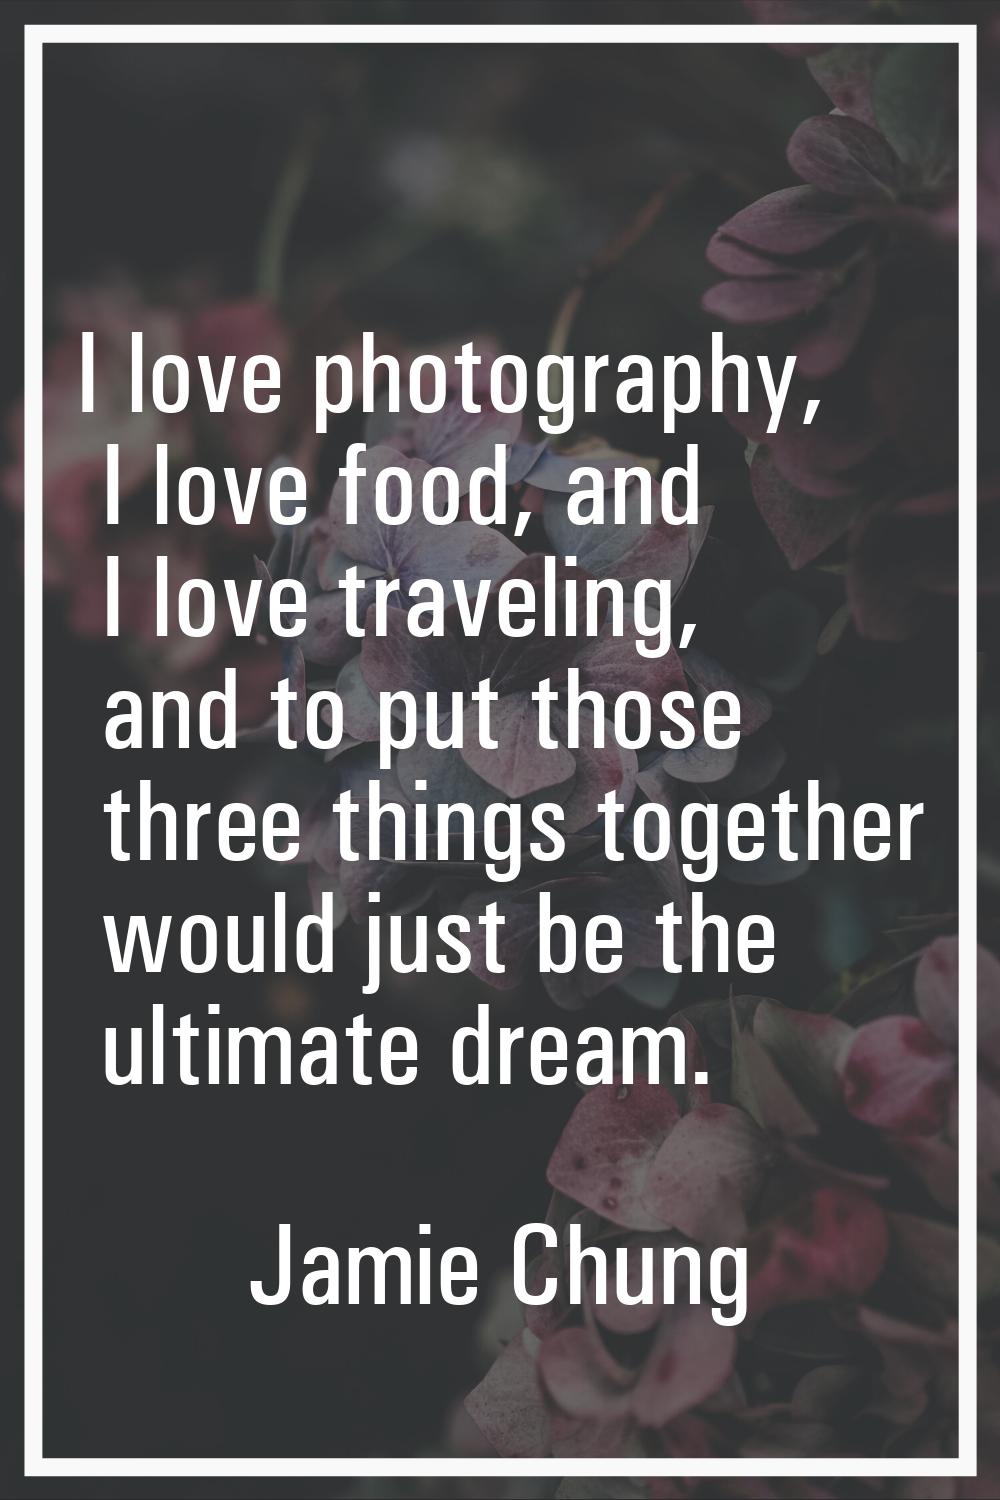 I love photography, I love food, and I love traveling, and to put those three things together would